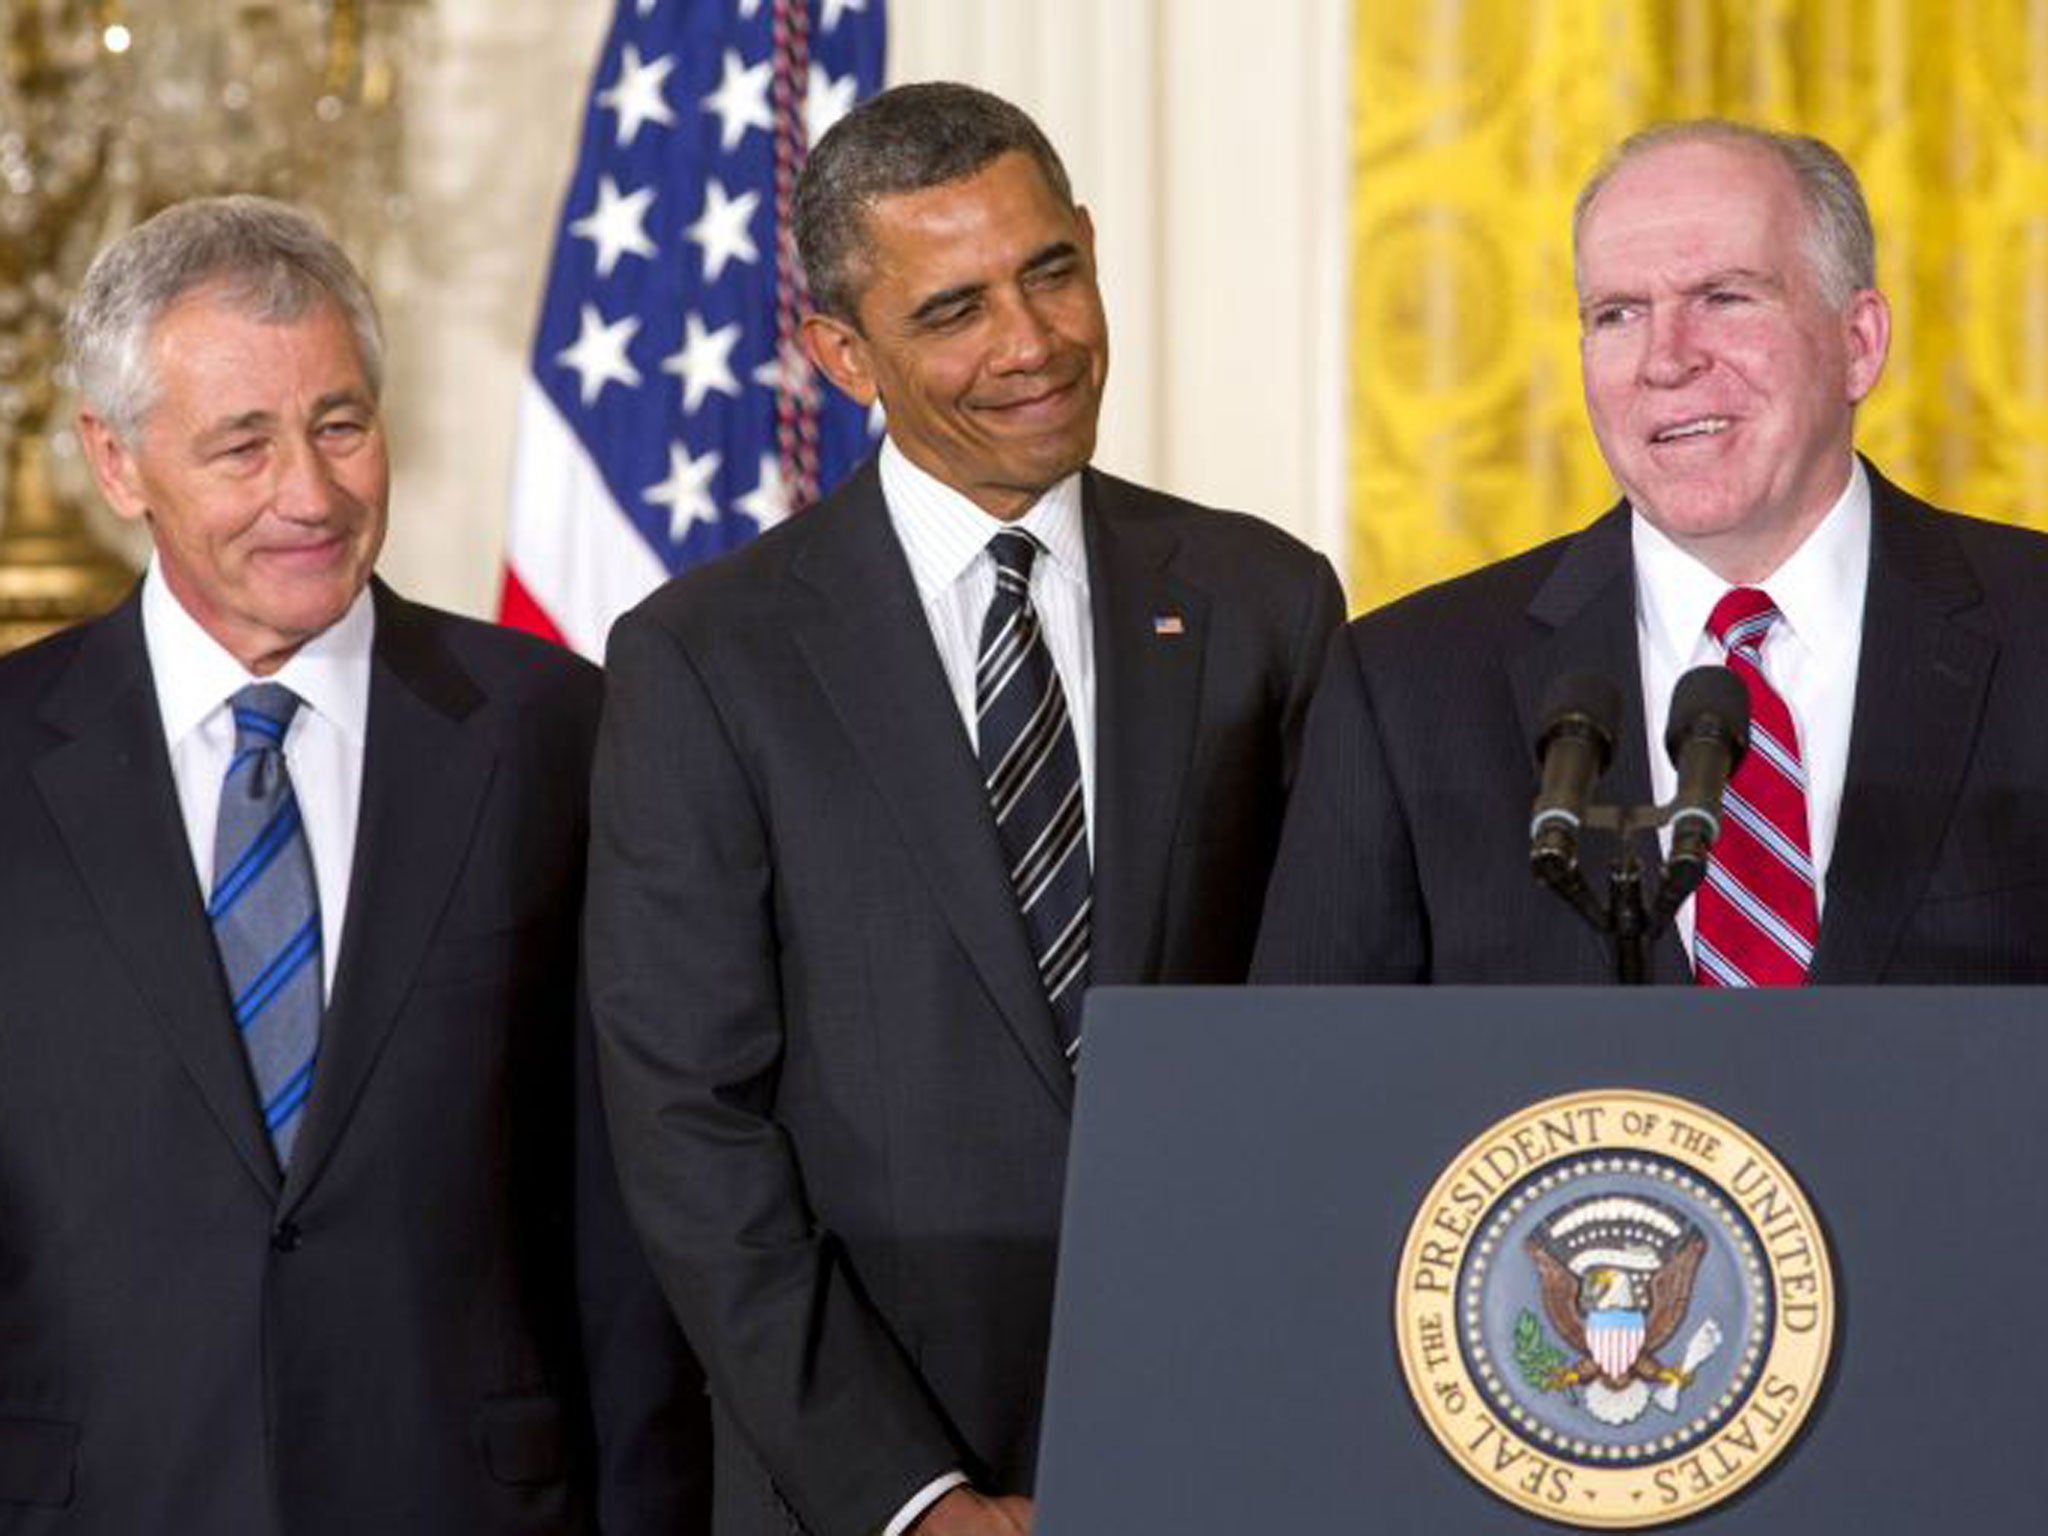 President Barack Obama pushed ahead yesterday with his choice of the former US Senator Chuck Hagel as America’s next Pentagon chief while nominating his anti-terror advisor, John Brennan, as director of the Central Intelligence Agency (CIA)